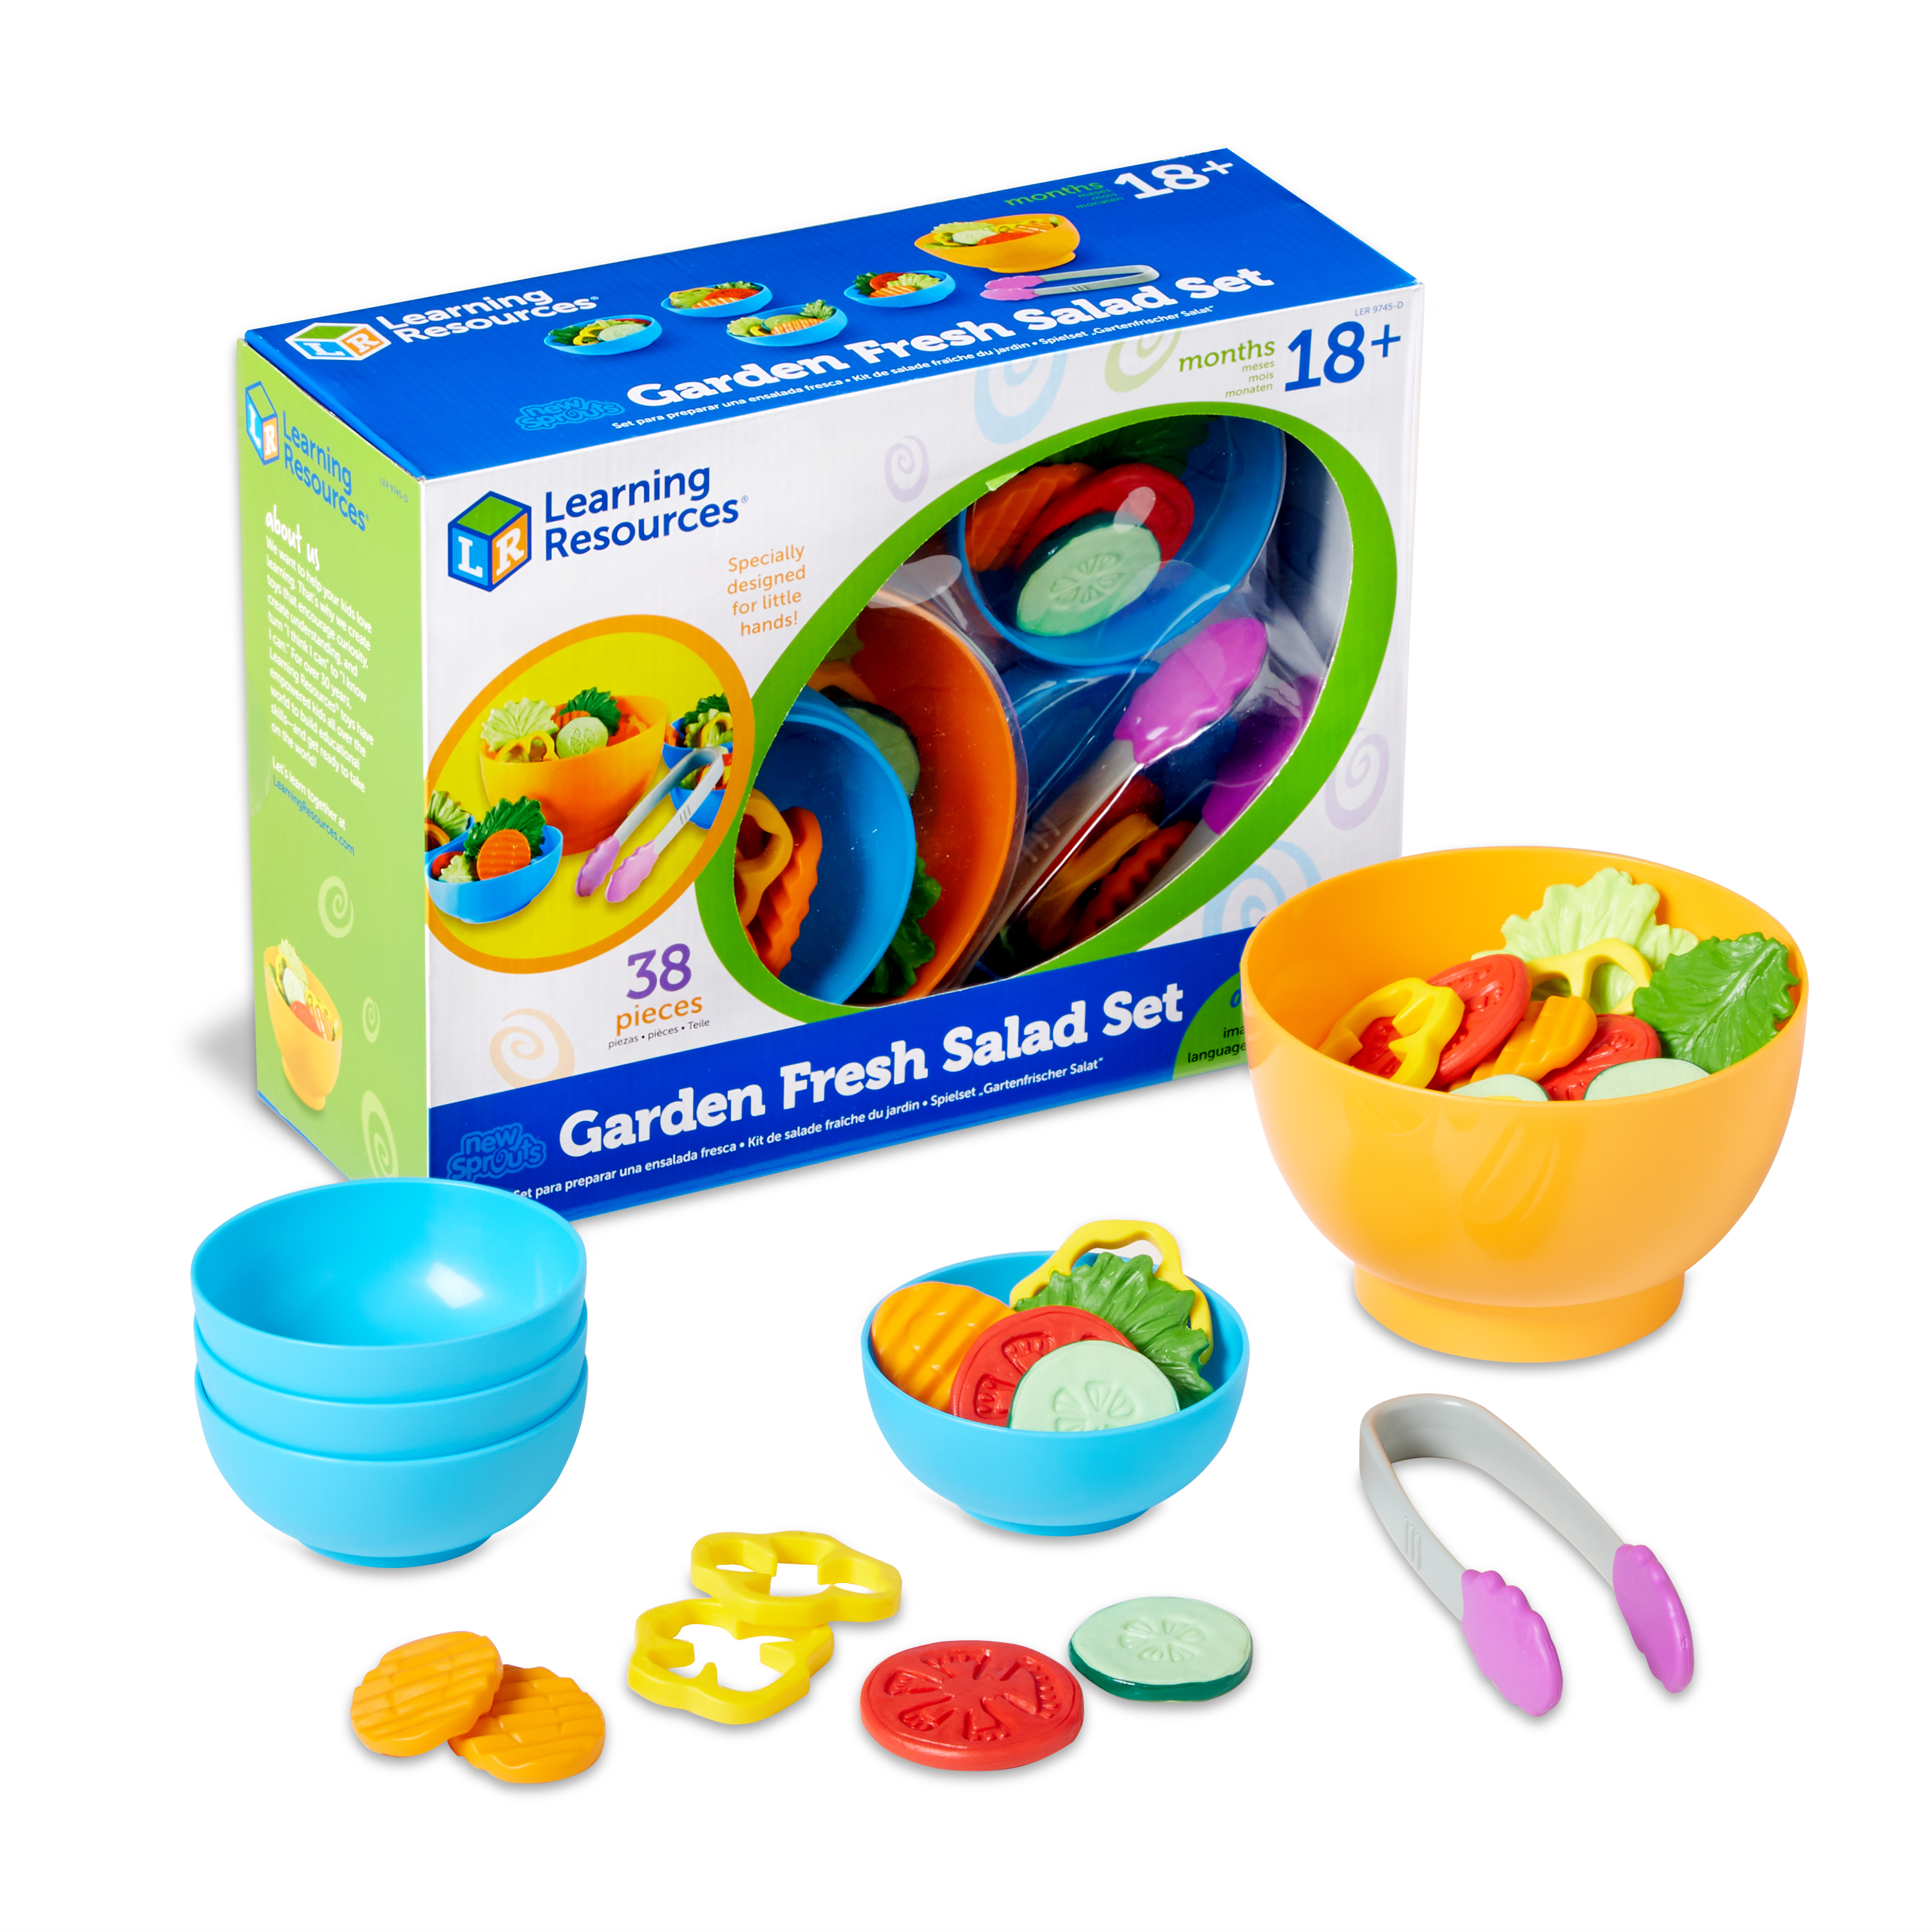 Learning Resources New Sprouts Garden Fresh Salad Playset, Play Pretend Kitchen Activity Preschool Toy for Kids Girls Boys Ages 2 3 4+ Year Old - image 1 of 5